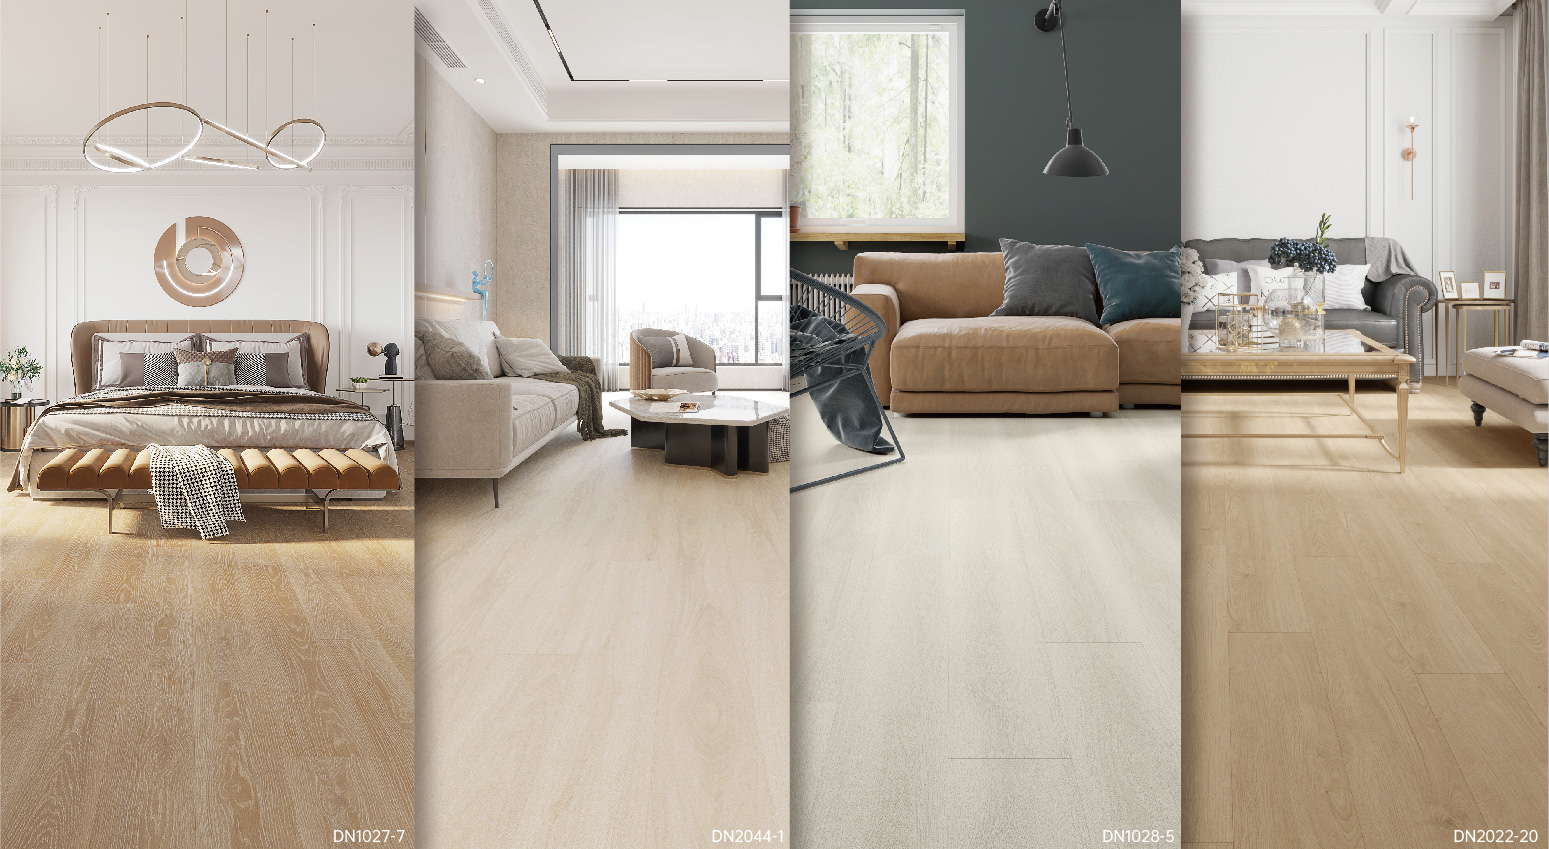 Top 5 Hottest Ideas On Flooring Trends for 2022